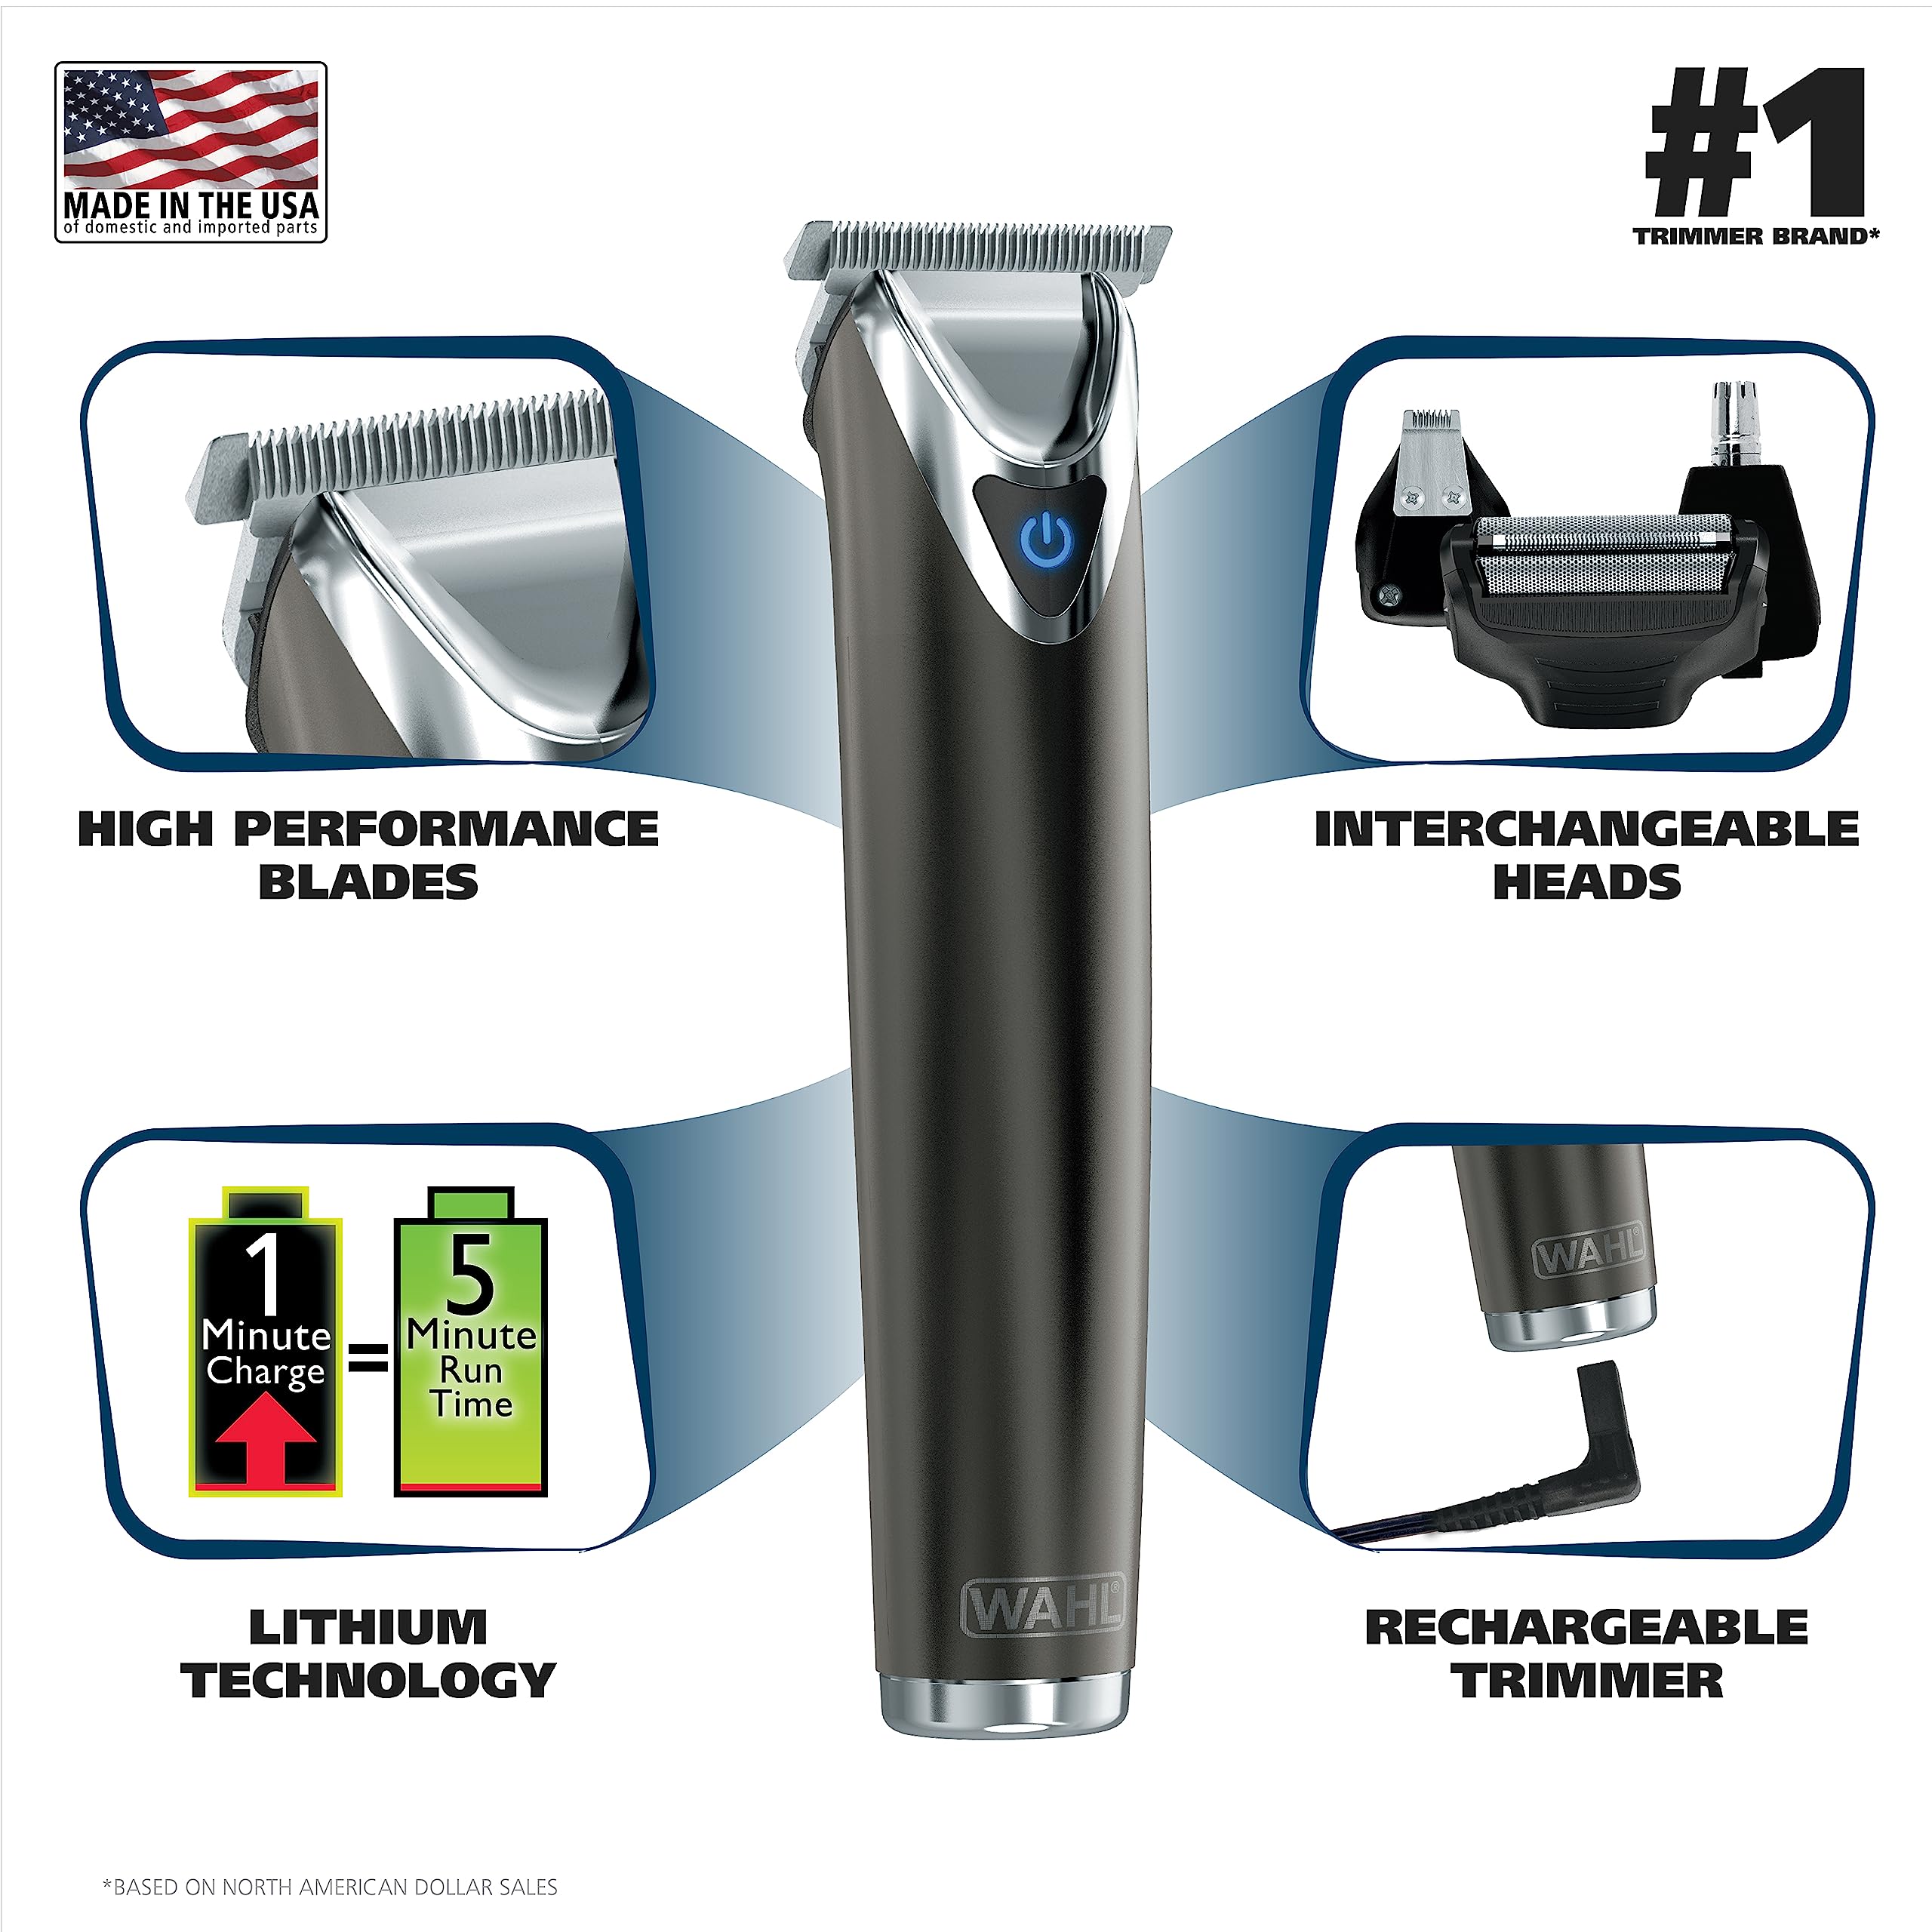 Wahl USA Stainless Steel Lithium Ion 2.0+ Slate Beard Trimmer for Men - Electric Shaver, Nose Ear Trimmer, Rechargeable All in One Men's Grooming Kit - Model 9864